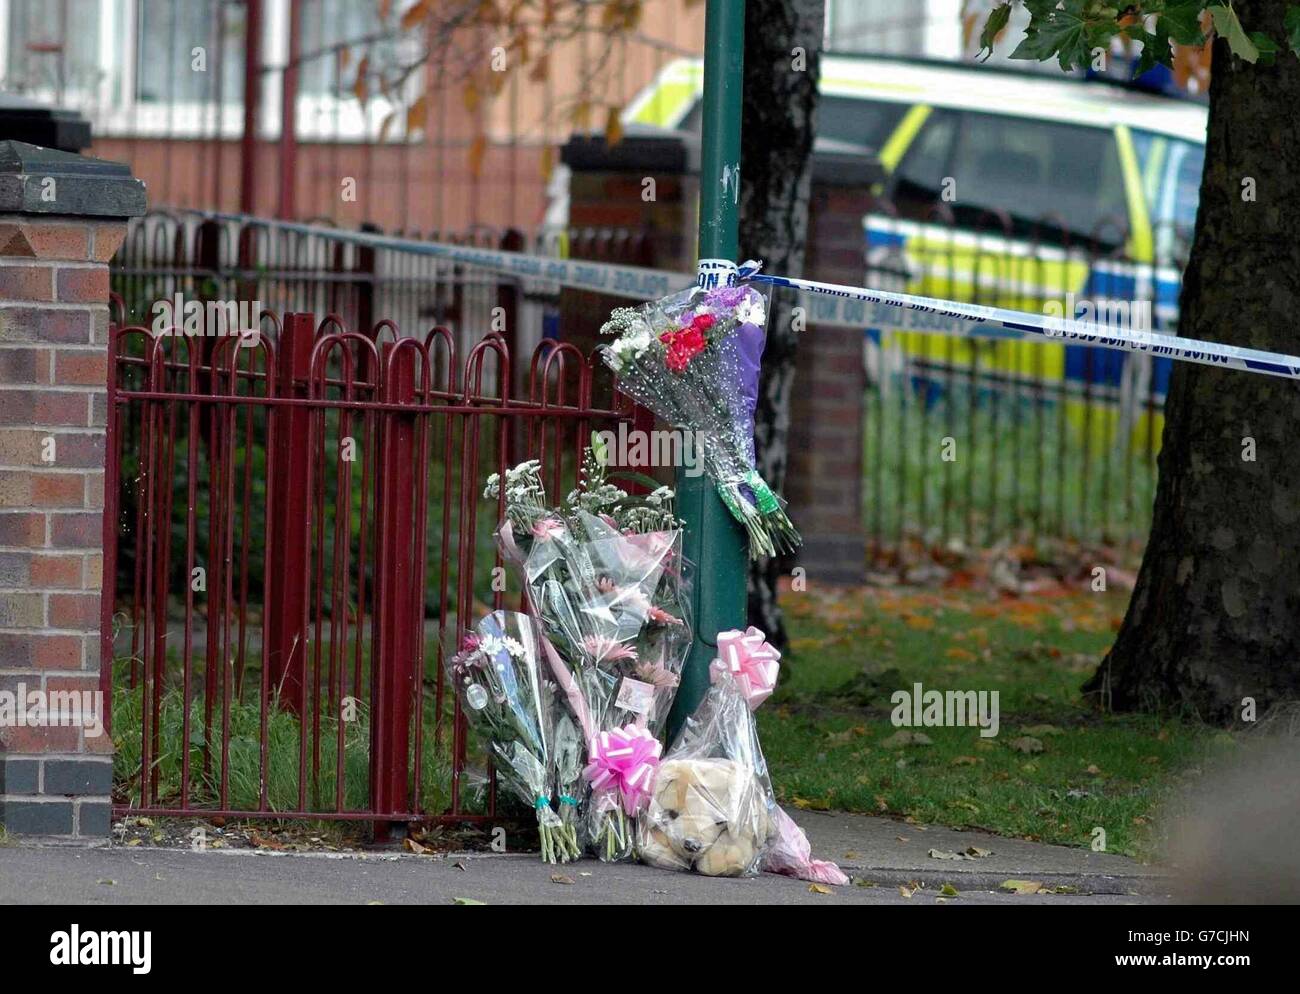 Flowers at the scene where 14-year-old Danielle Beccan was shot dead in the street as she walked home from a funfair. The 14-year-old was with a group of friends when she was shot six times from a passing car in an apparently random attack. She and her friends were walking through the Nottingham inner-city suburbs of St Ann's just after midnight when her killer struck. Police said today they were baffled by the shooting. Stock Photo